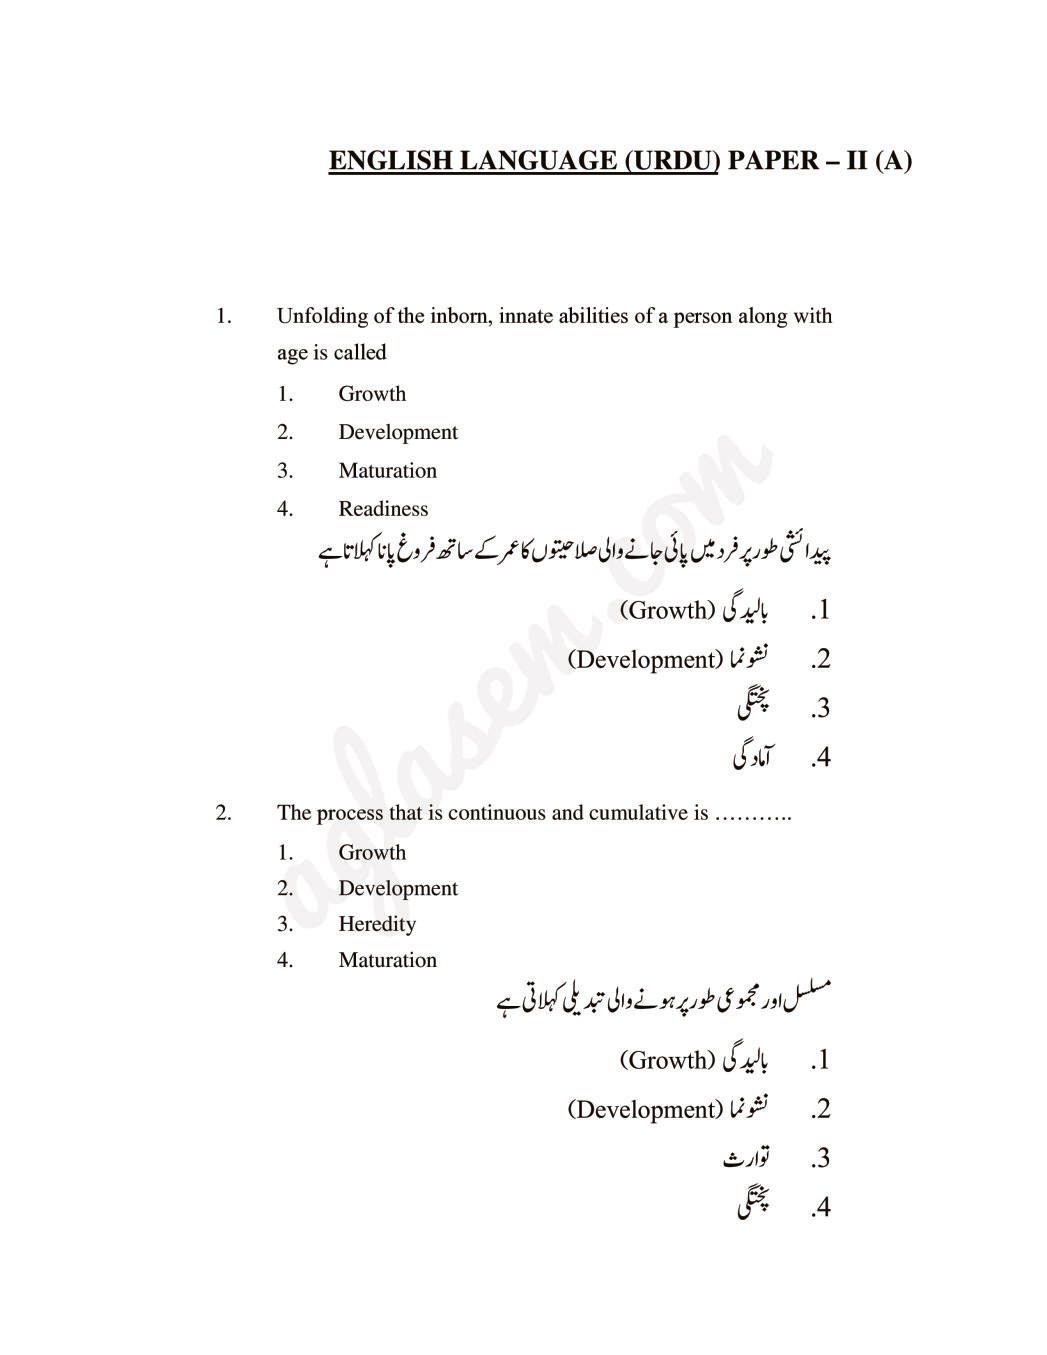 APTET Question Paper with Answers 18 Jun 2018 Paper 2 English (Shift 2) - Page 1